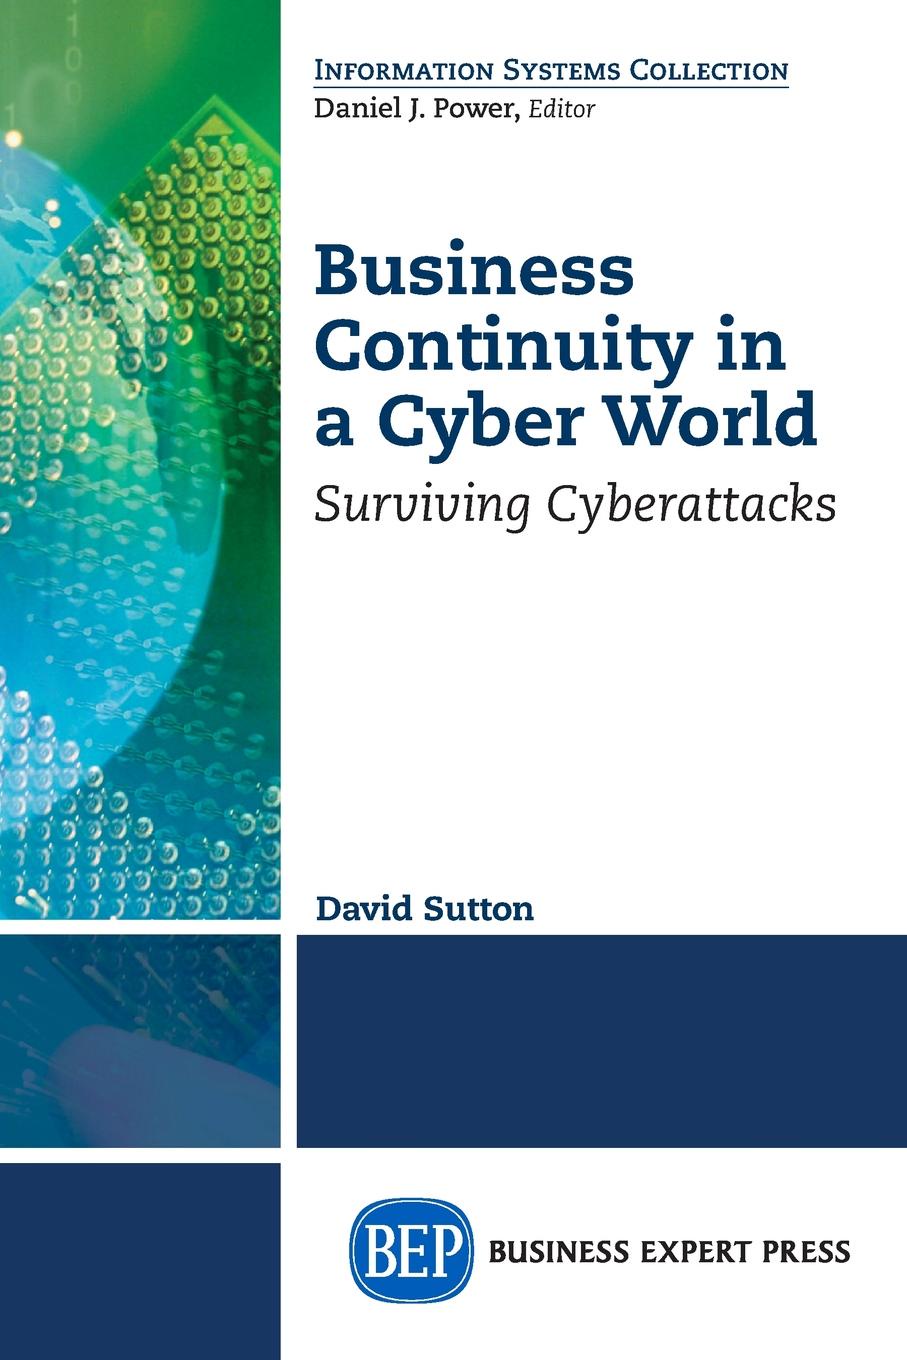 Business Continuity in a Cyber World. Surviving Cyberattacks